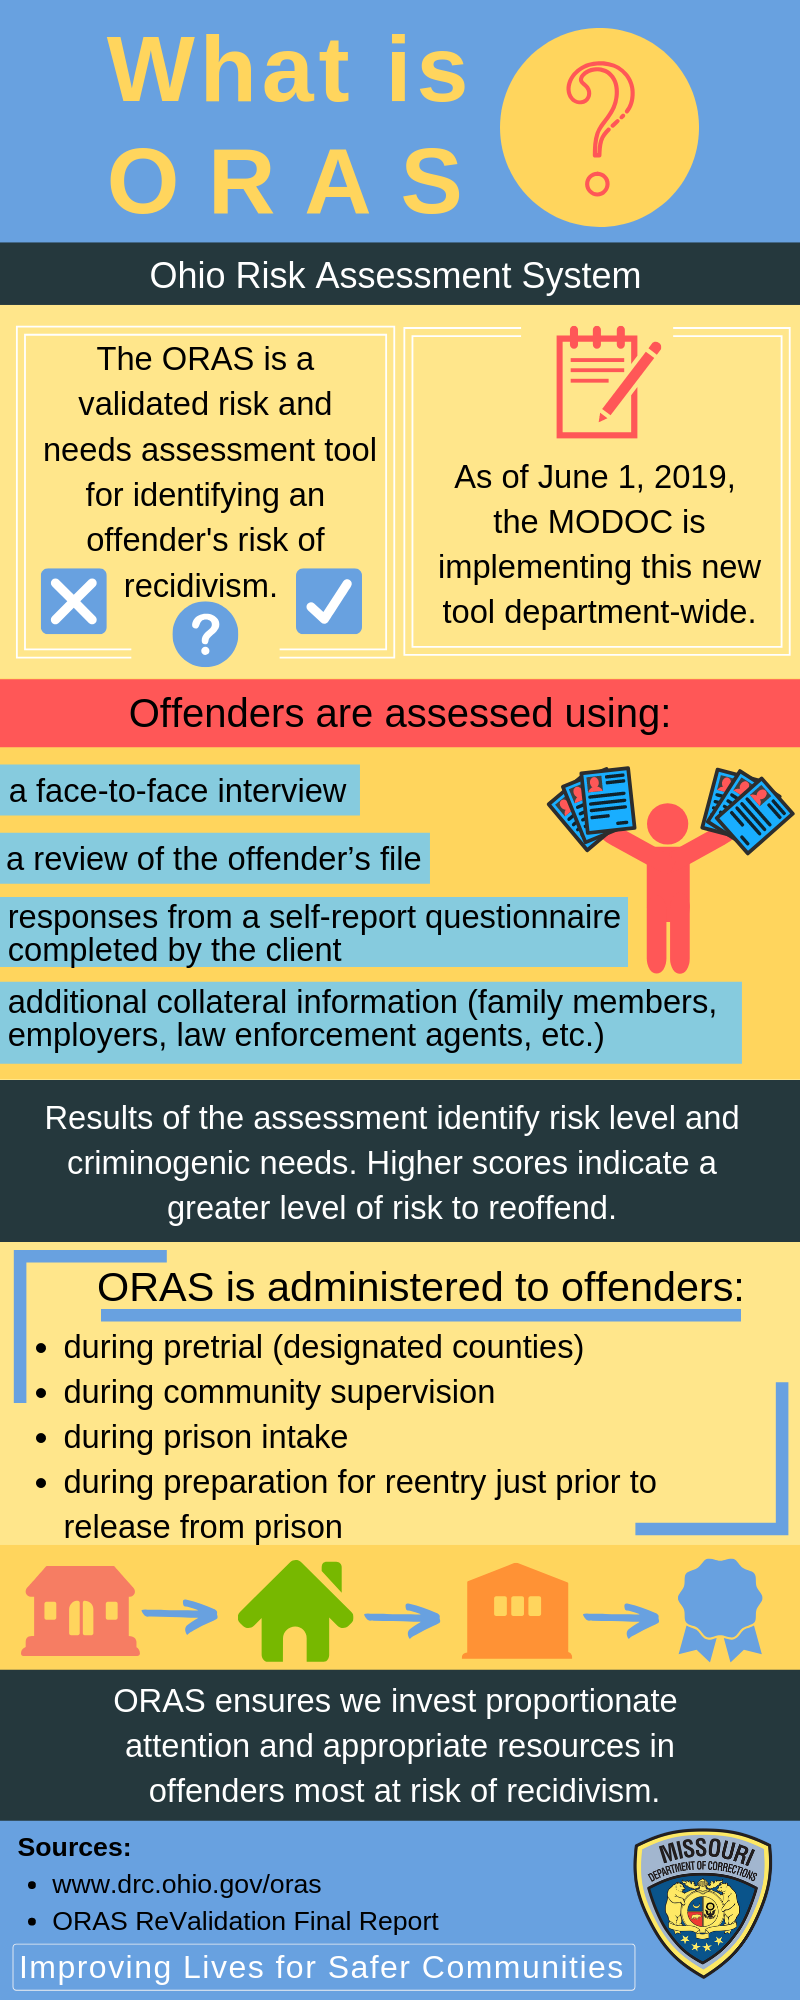 Explanation of the Ohio Risk Assessment System. The ORAS is a validated risk and needs assessmetn tool for identifying an offender's risk of recidivism. As of June 1, 2019, MODOC is implemetning this new department-wide tool. Offenders are assessed using face-to-face interviews, offender file reviews, questionnaires adn additional collateral information. REsults of teh assessmetn indeitfy risk level and criminogenic needs. Higher scores indicate a greater level of risk to reoffend.